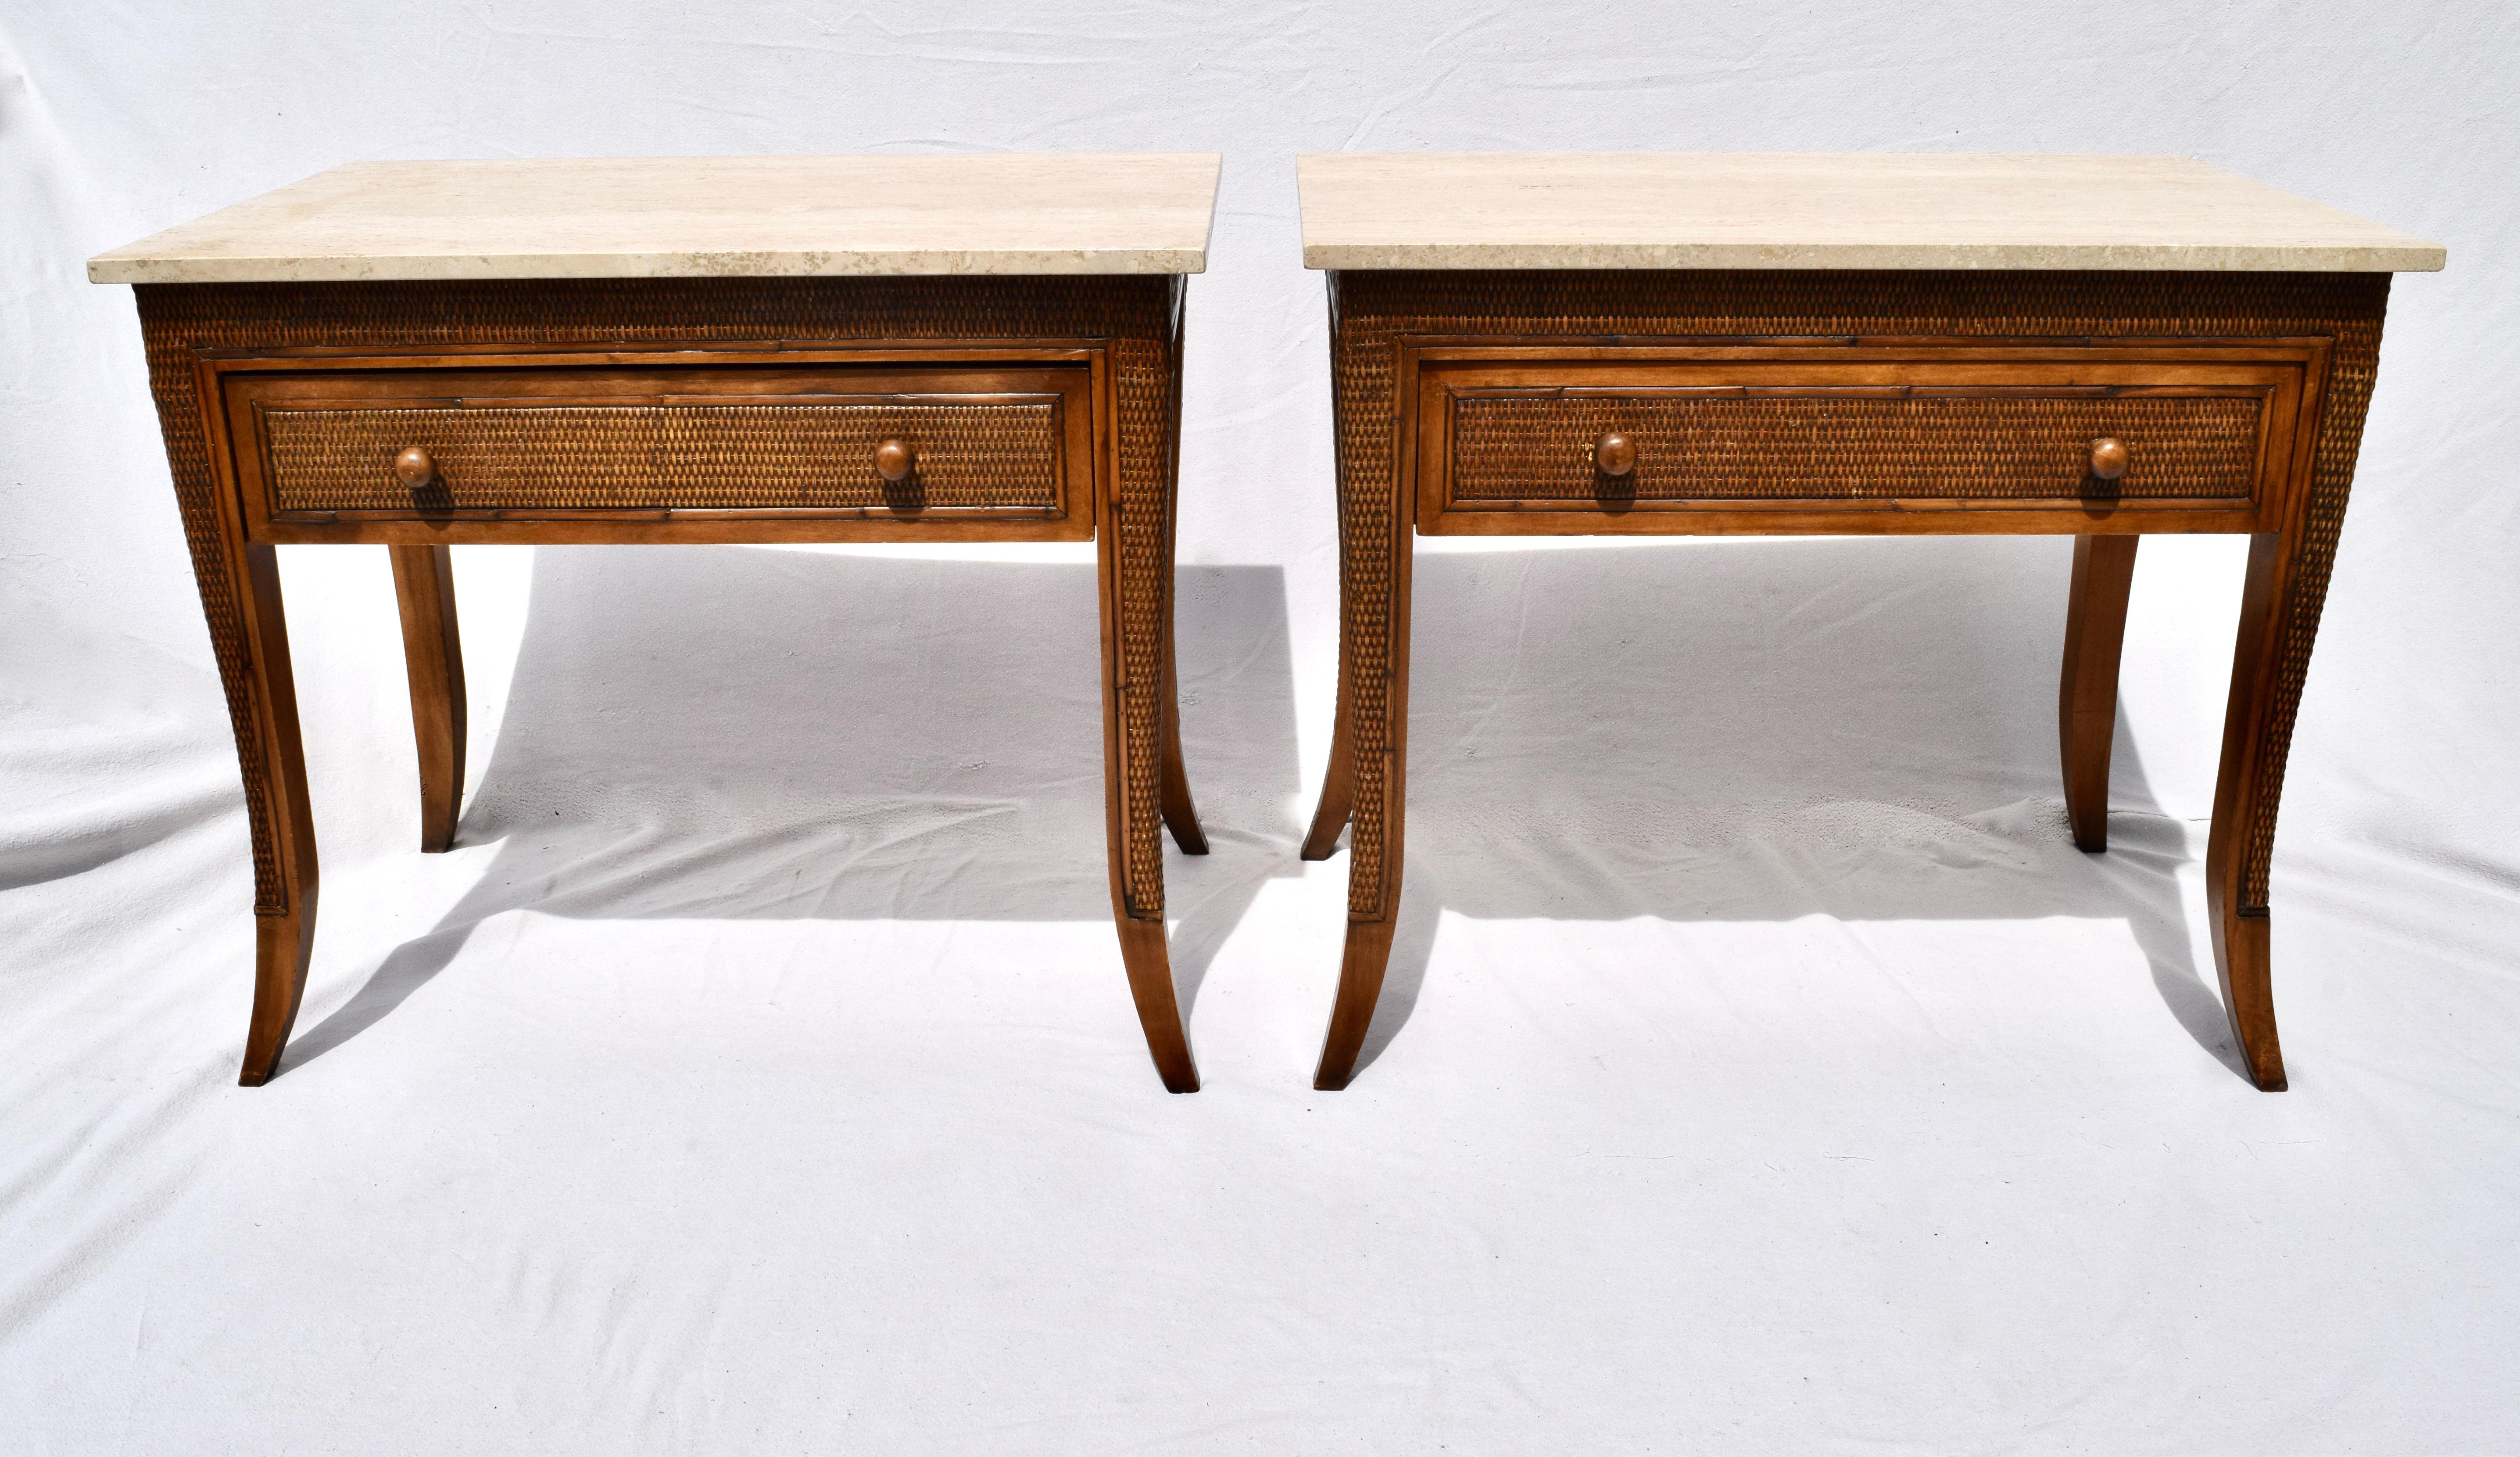 A pair of Faux bamboo grasscloth end or side tables after British Colonial furniture of the 19th century. Features removable travertine tops, single drawer with saber leg styling. Rarely used condition.